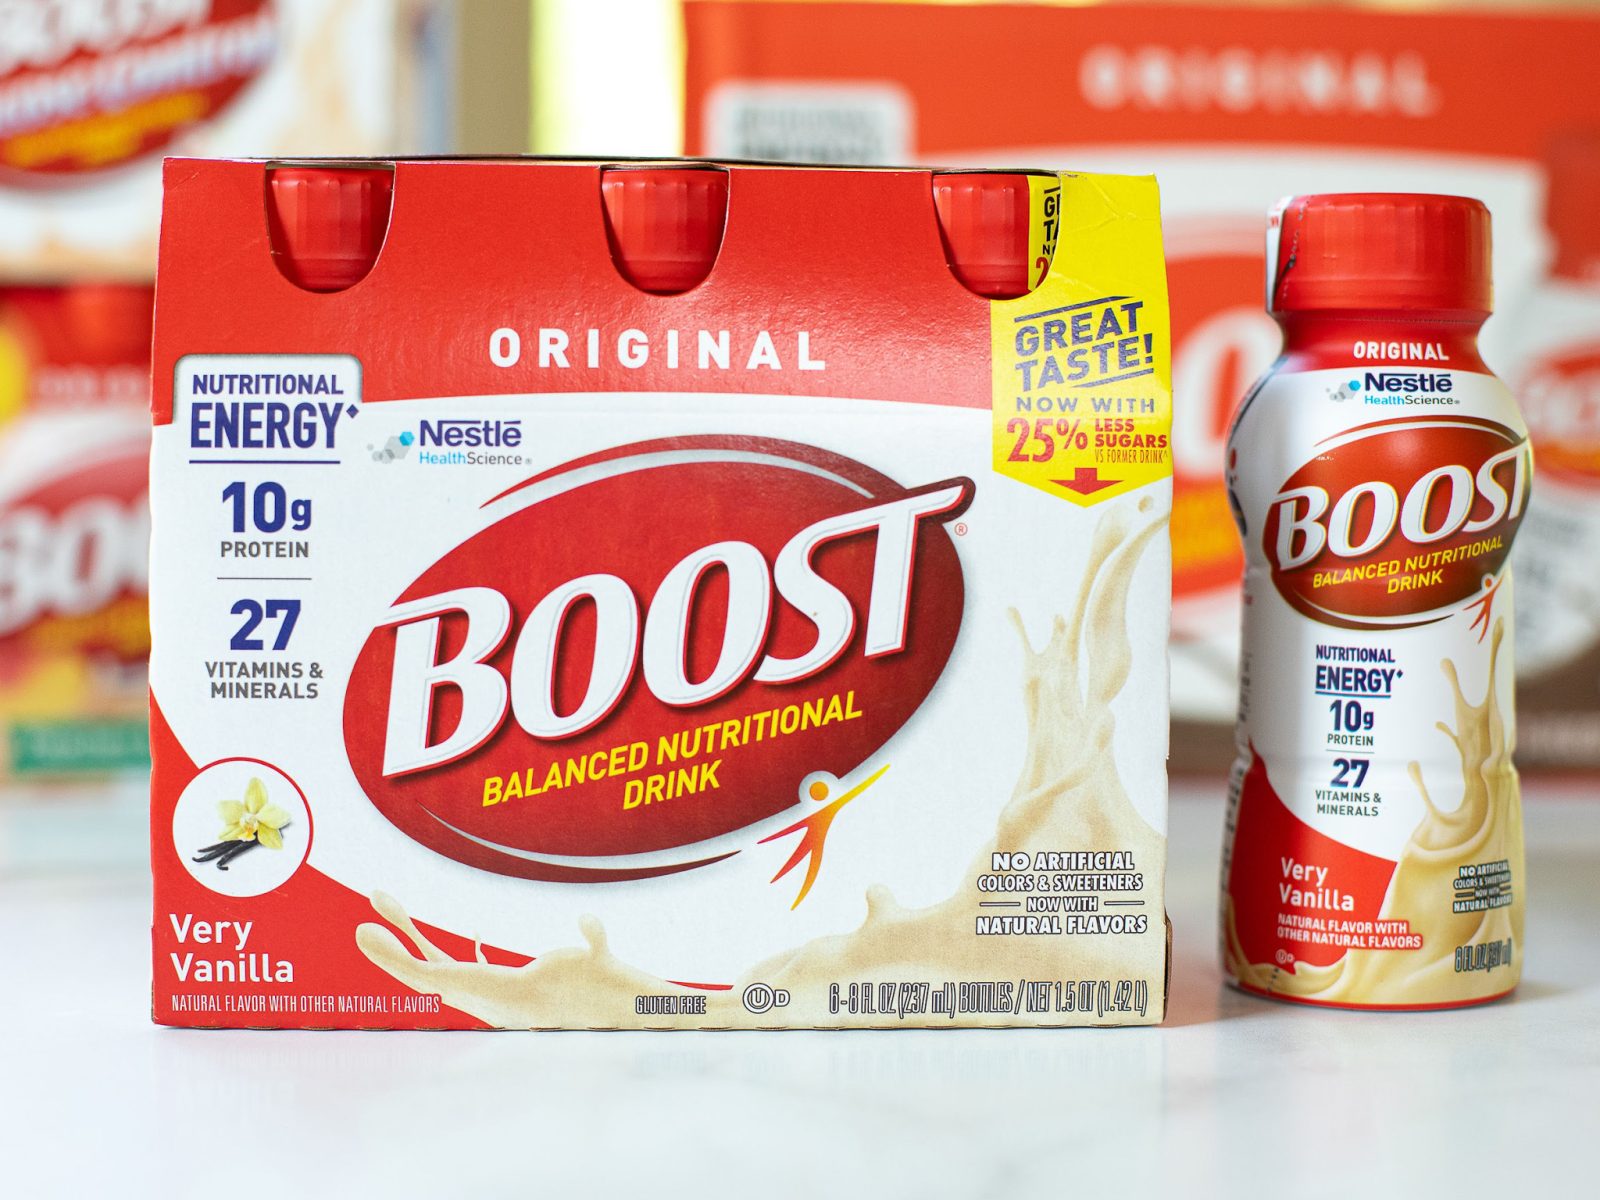 Boost Nutritional Drink As Low As $3.99 At Kroger